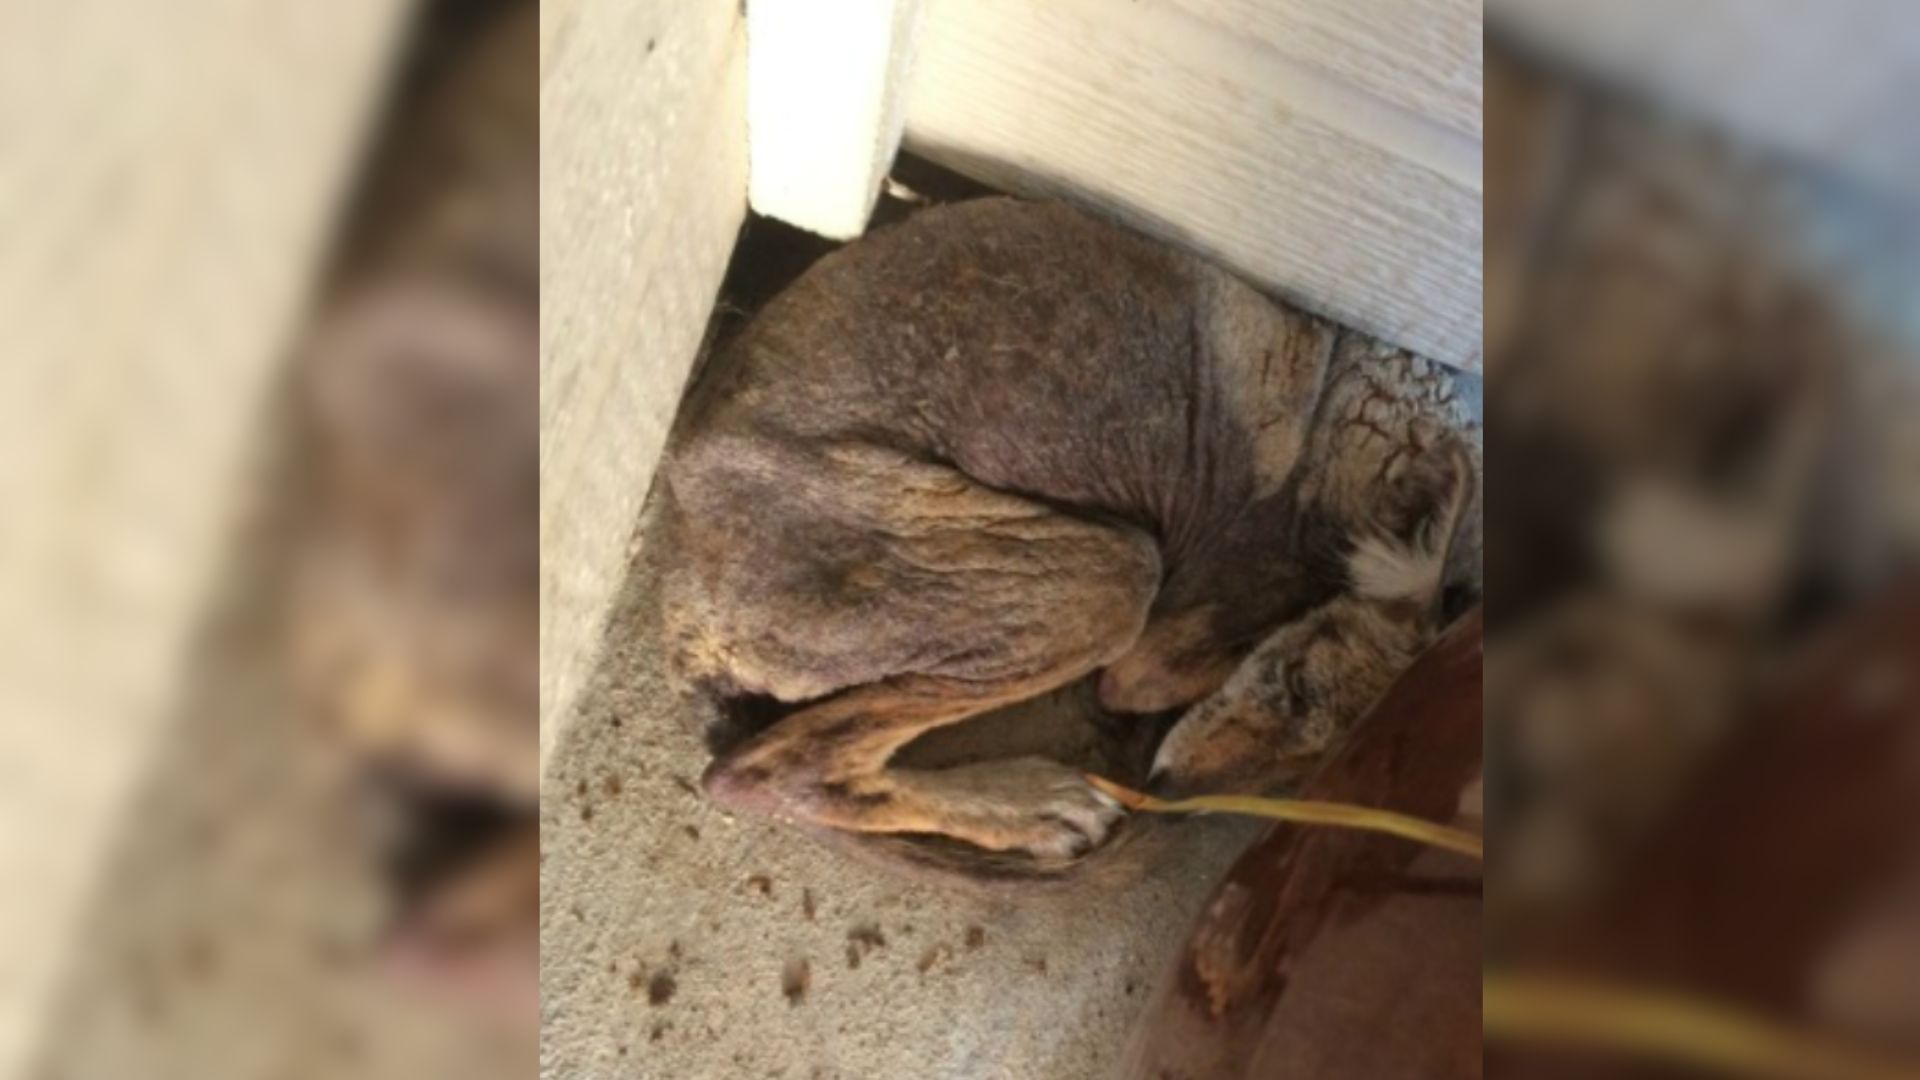 Woman Tries To Help A Dog Lying Underneath Her Porch, Then Finds Out Its Real Identity